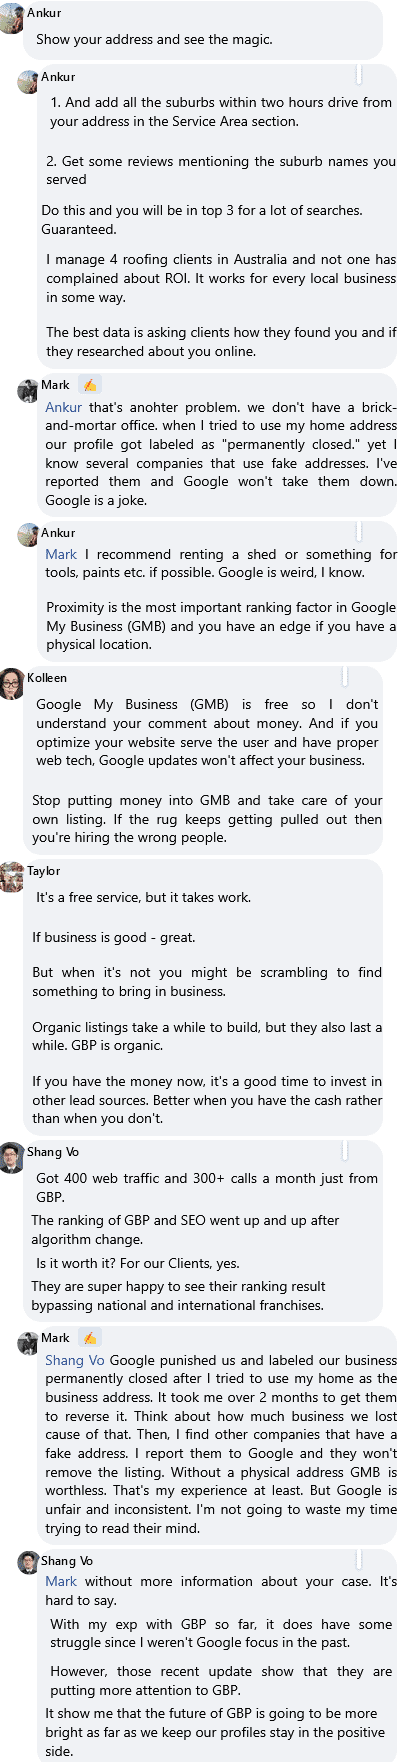 somethings not to do to optimize a google my business gmb or business profile gbp